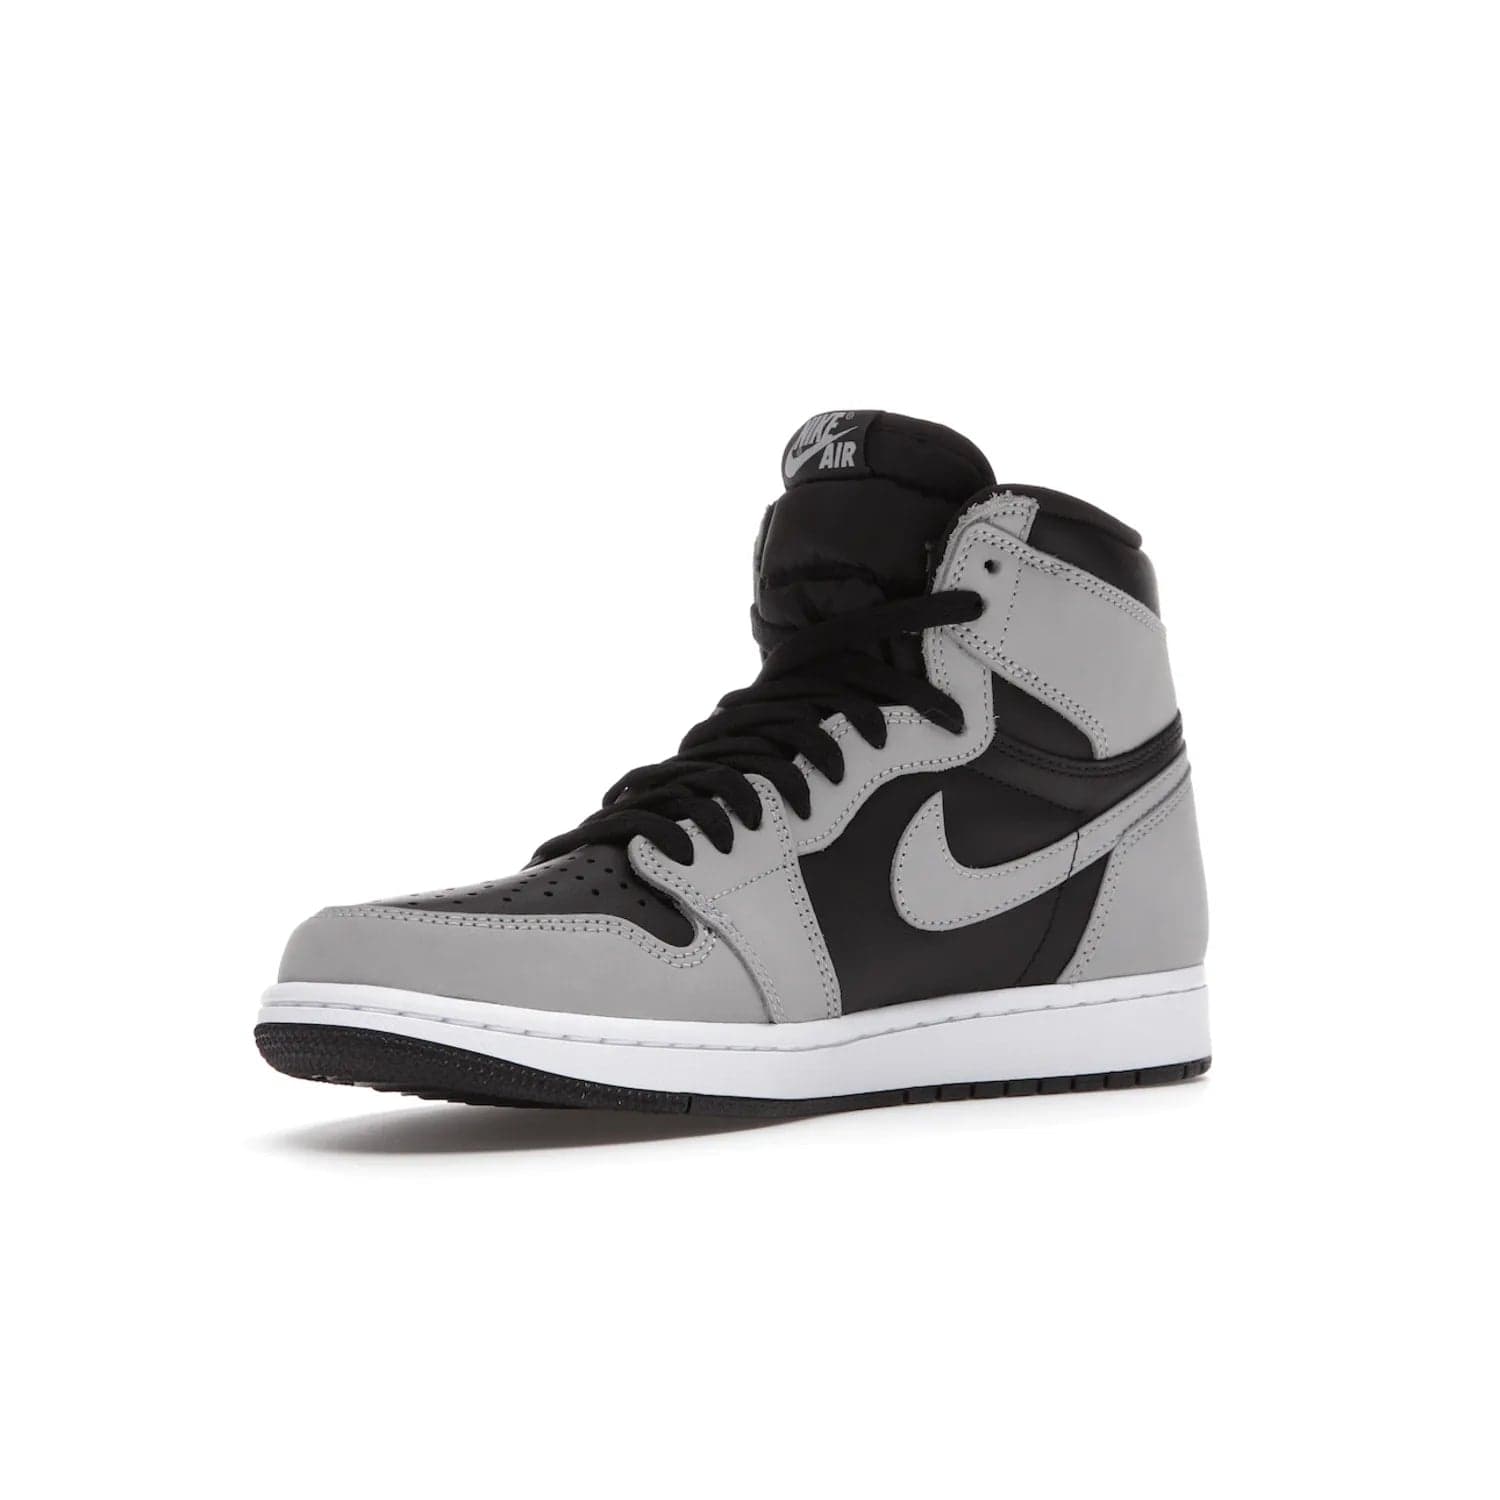 Jordan 1 Retro High Shadow 2.0 - Image 15 - Only at www.BallersClubKickz.com - #
Classic Air Jordan 1 Retro High Shadow 2.0 with black leather base and Light Smoke Grey overlays. Released in May 2021.